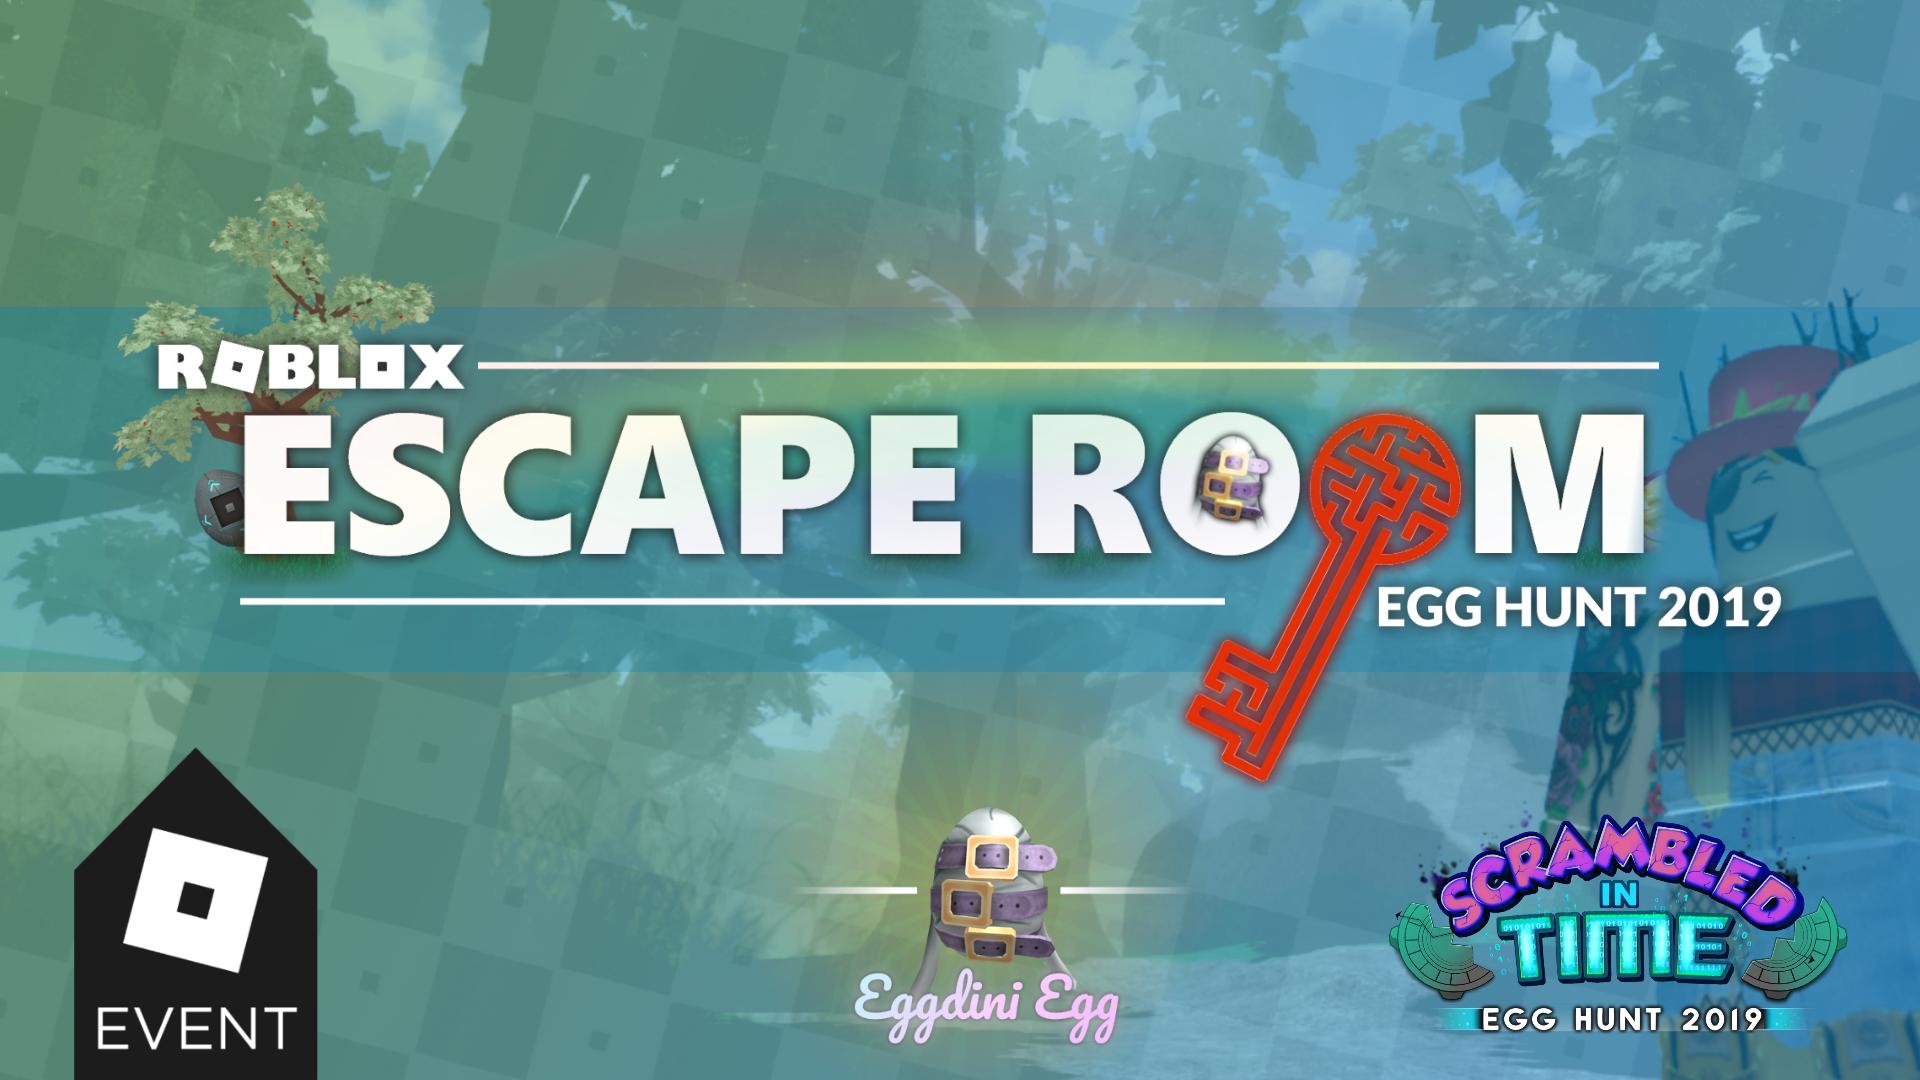 Devultra On Twitter This Year Escape Room Is Proud To Be A Part Of Roblox S Egghunt2019 Event Escape Our All New Enchanted Forest Map With The Eggdini Egg To Earn A Prize - escape room roblox enchanted forest password roblox free